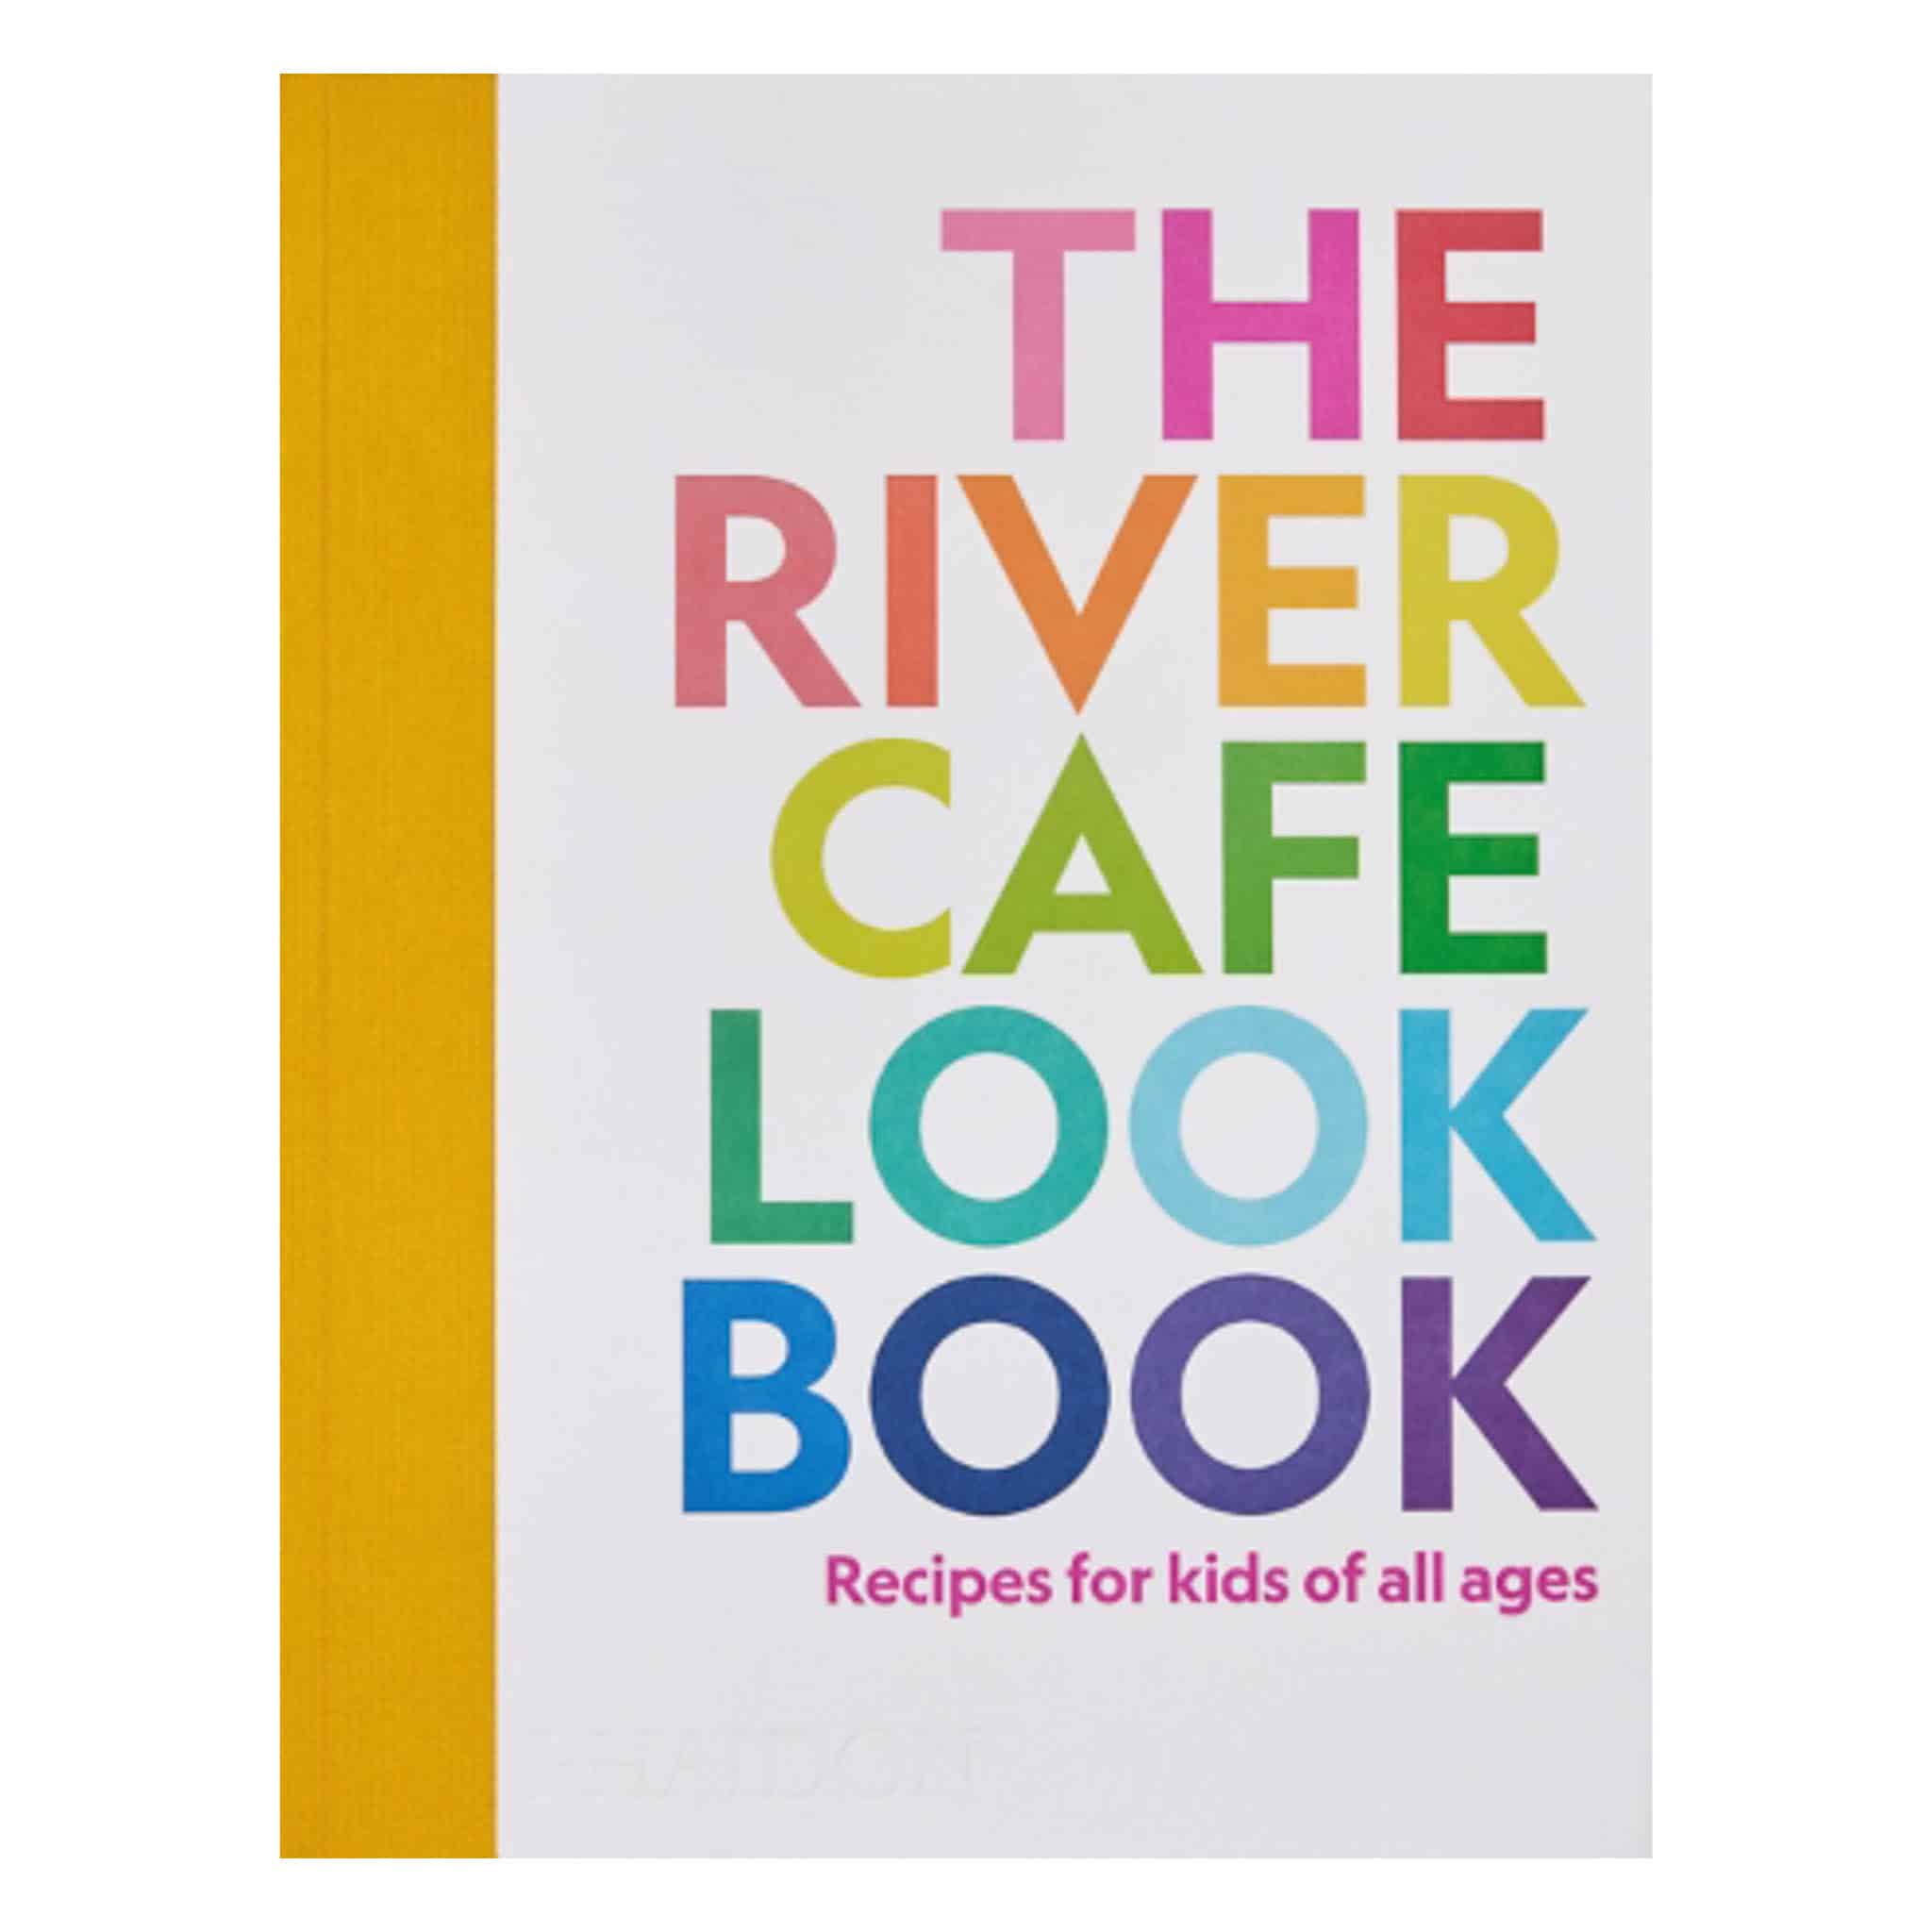 The River Cafe Look Book, Recipes for Kids of all Ages, by Ruth Rogers